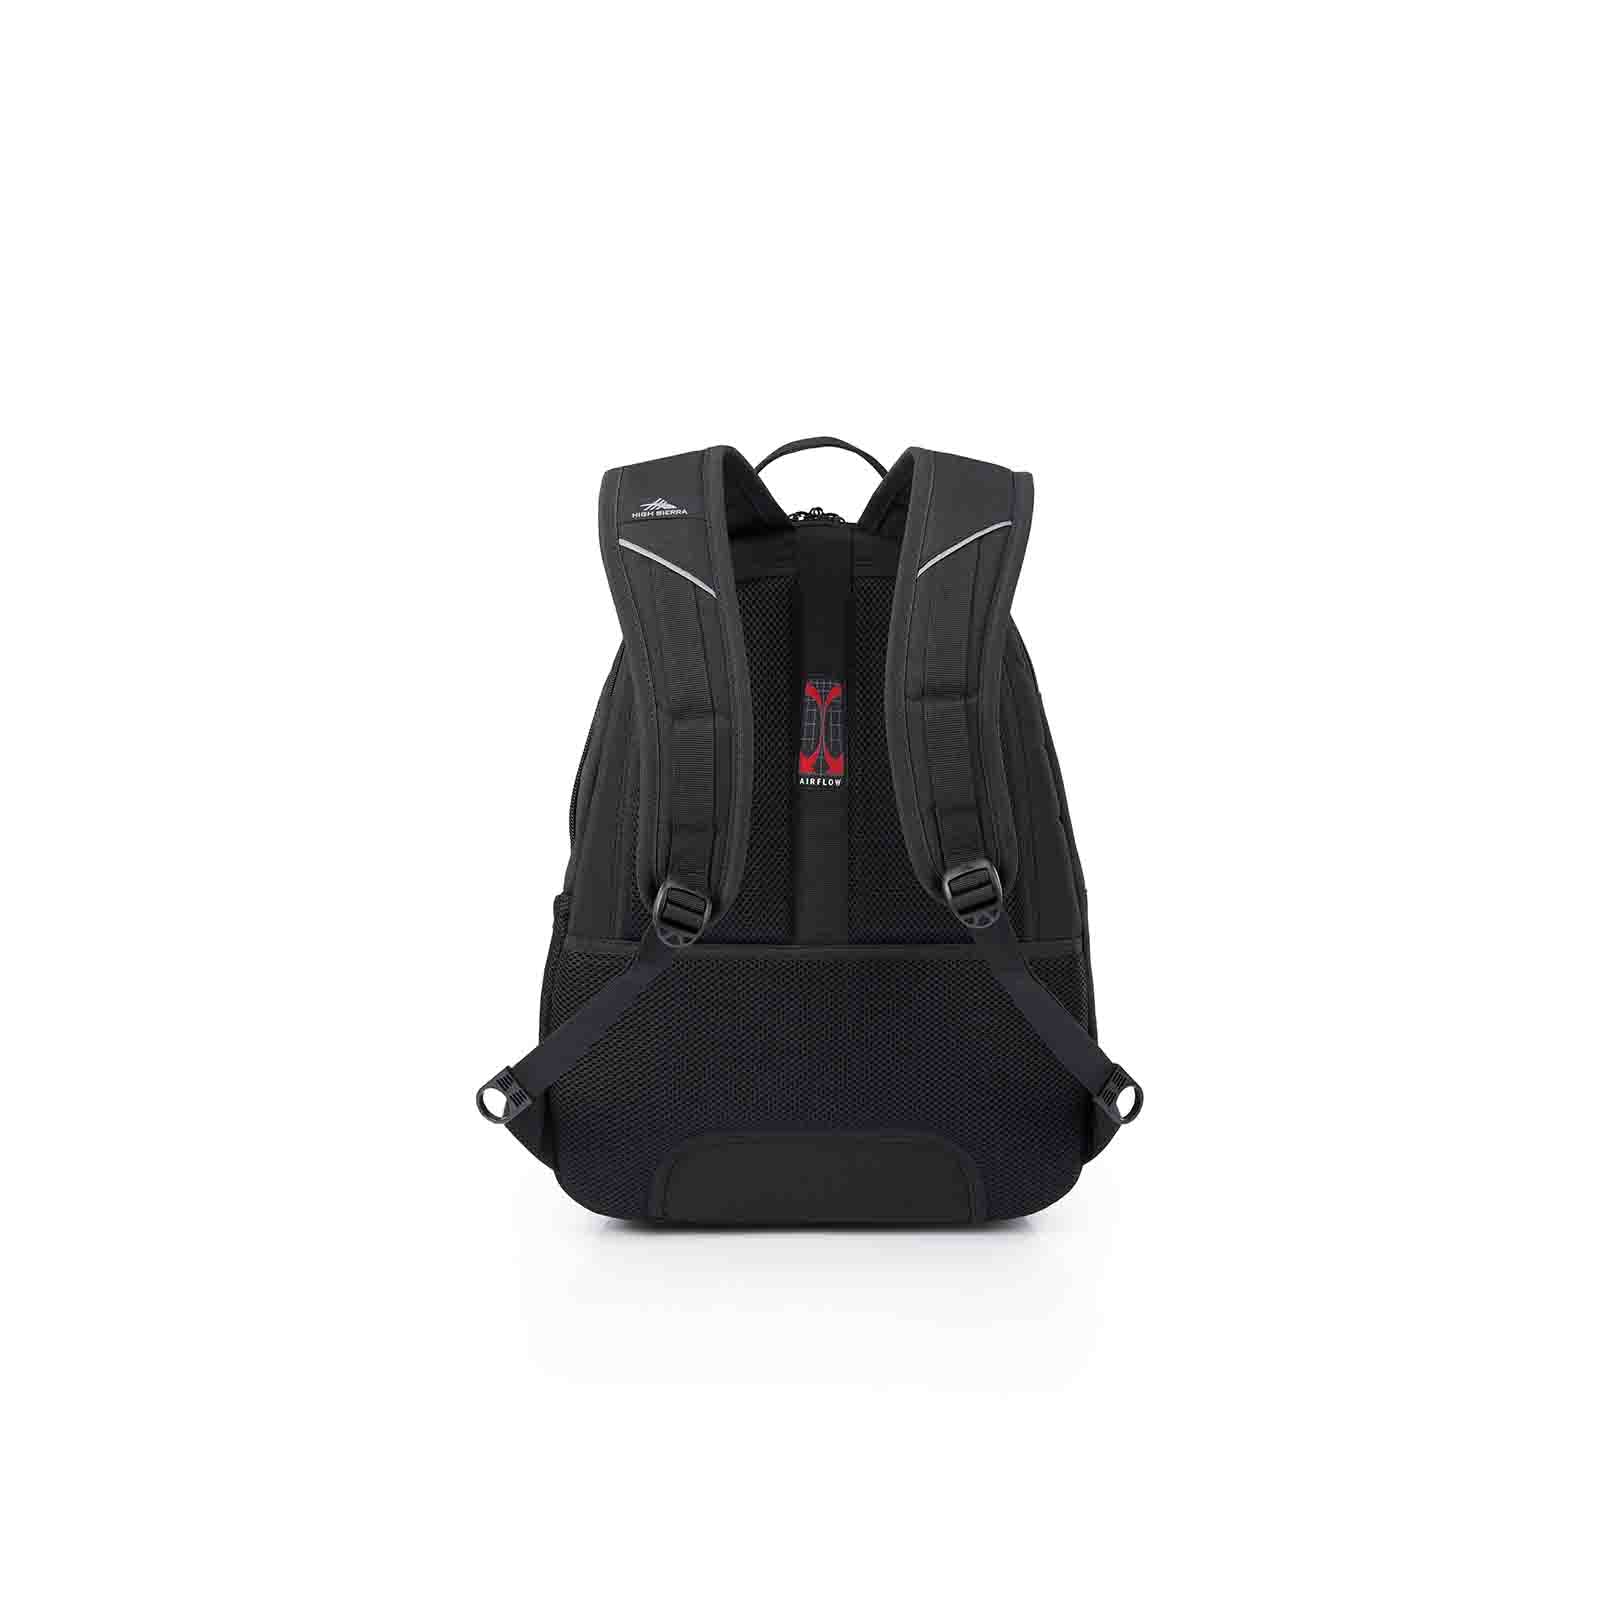 High-Sierra-Academy-3-Eco-15-Inch-Laptop-Backpack-Black-Harness